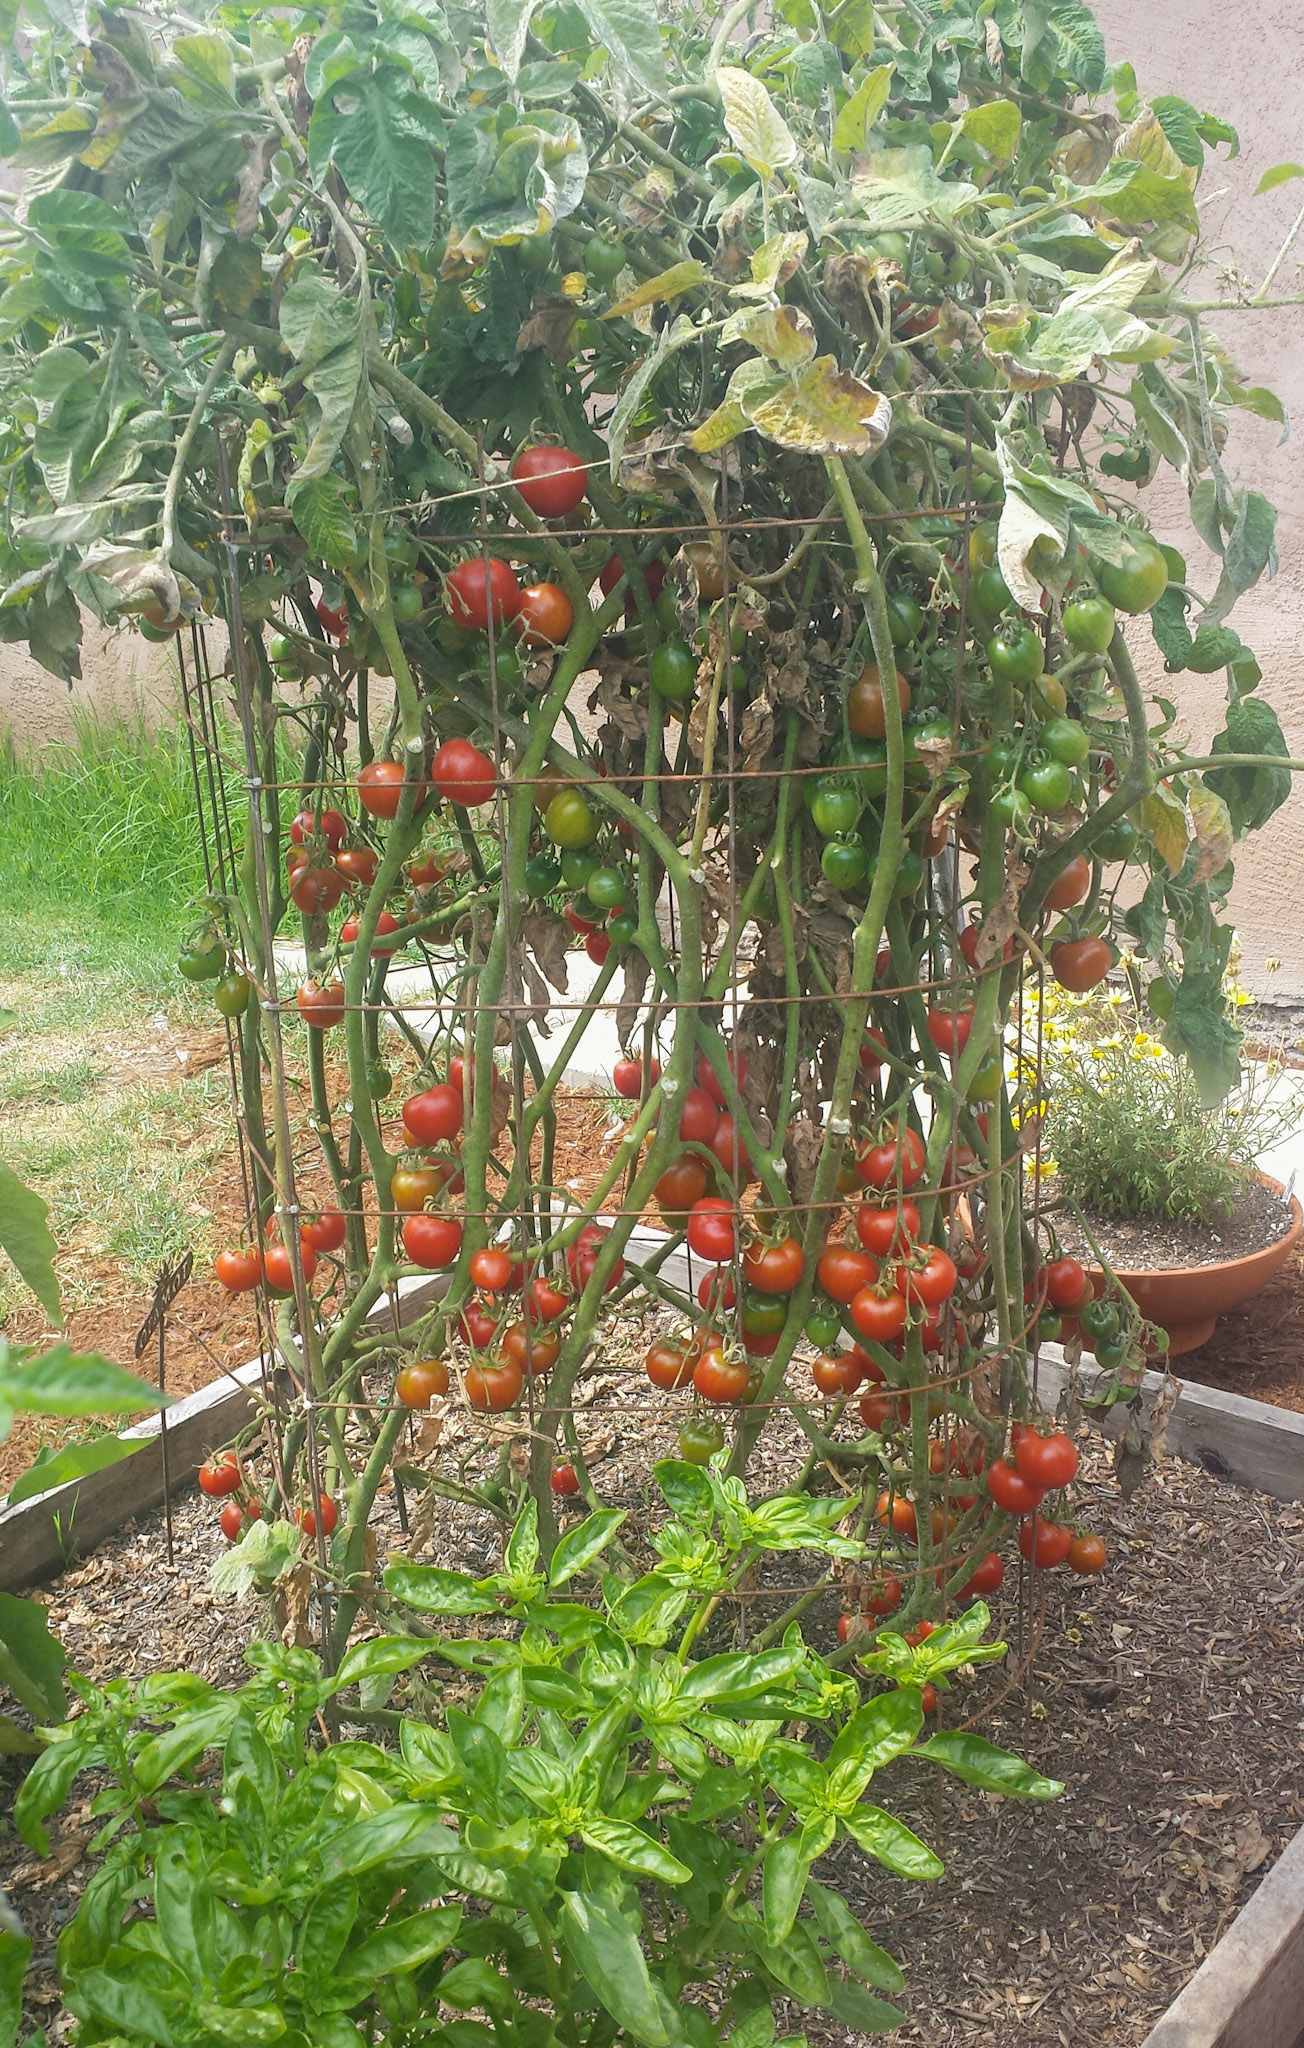 A tomato plant growing in a raised garden bed inside of a tomato cage is shown. The plant is heavily ladened with fruit as red and green tomatoes are visible from the bottom of the plant to the top. A bunch of basil plants are growing nearing the foreground.